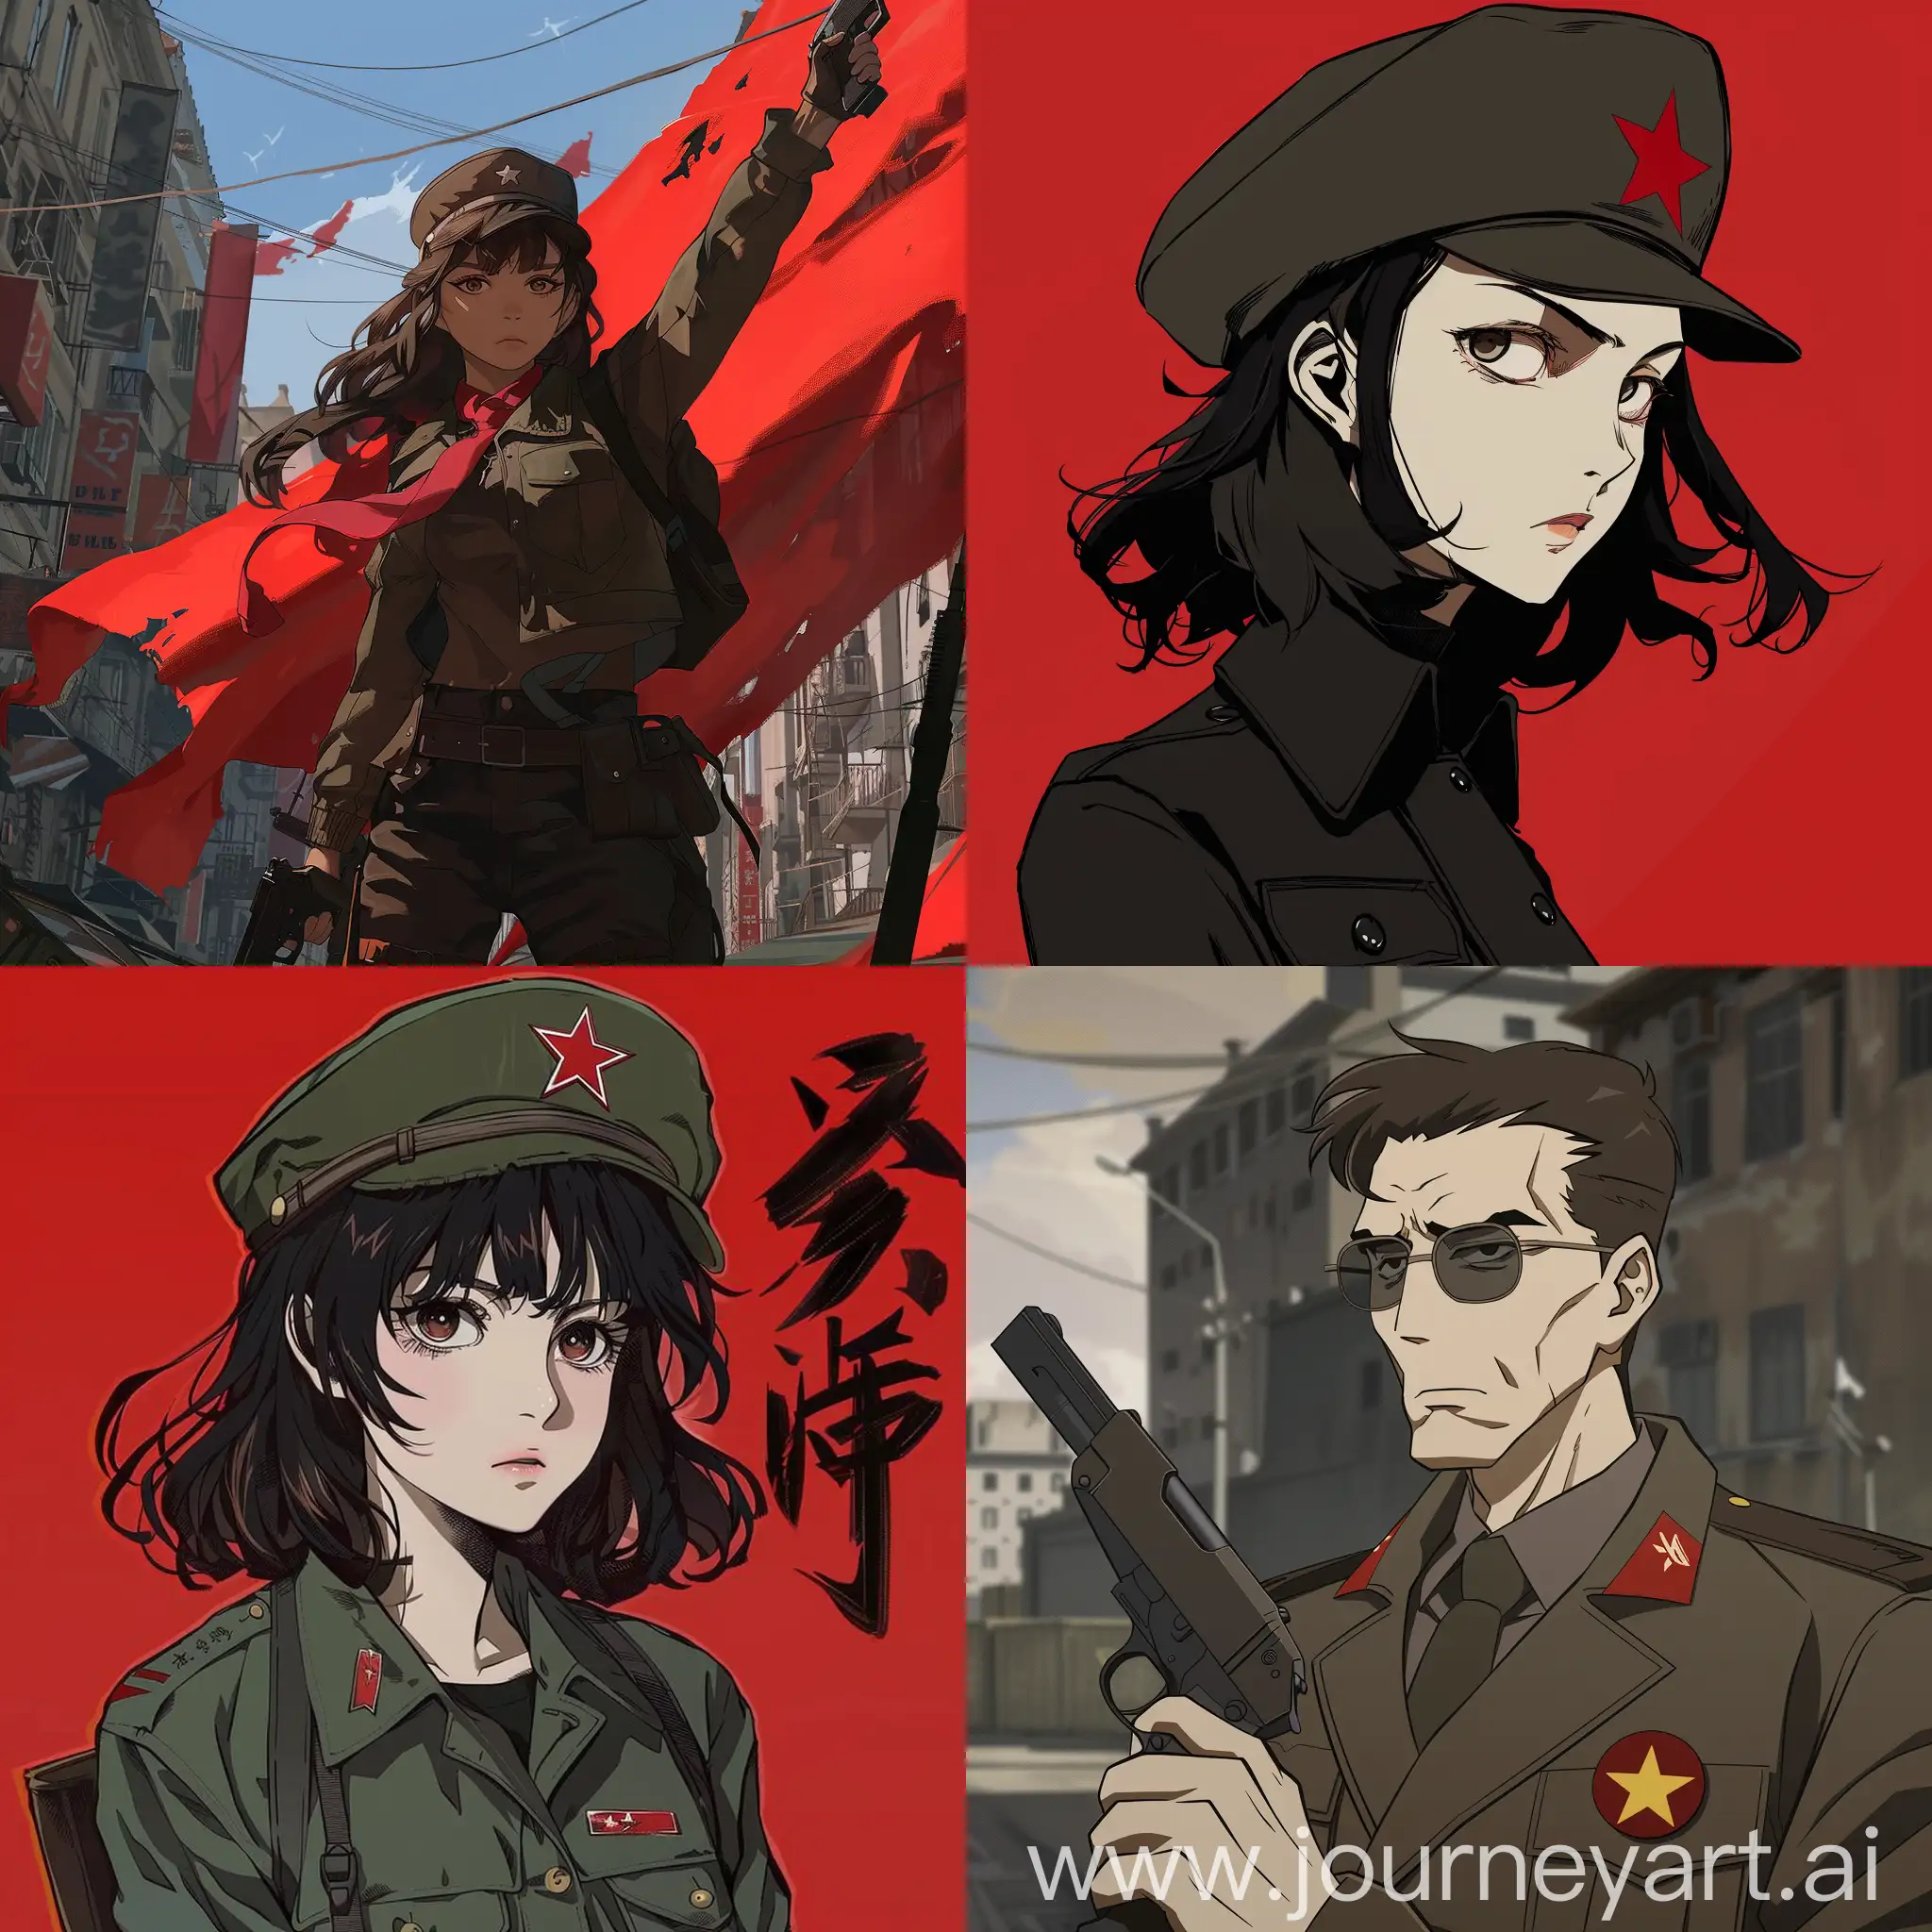 Anime-Style-Proletarian-Worker-with-Determined-Stance